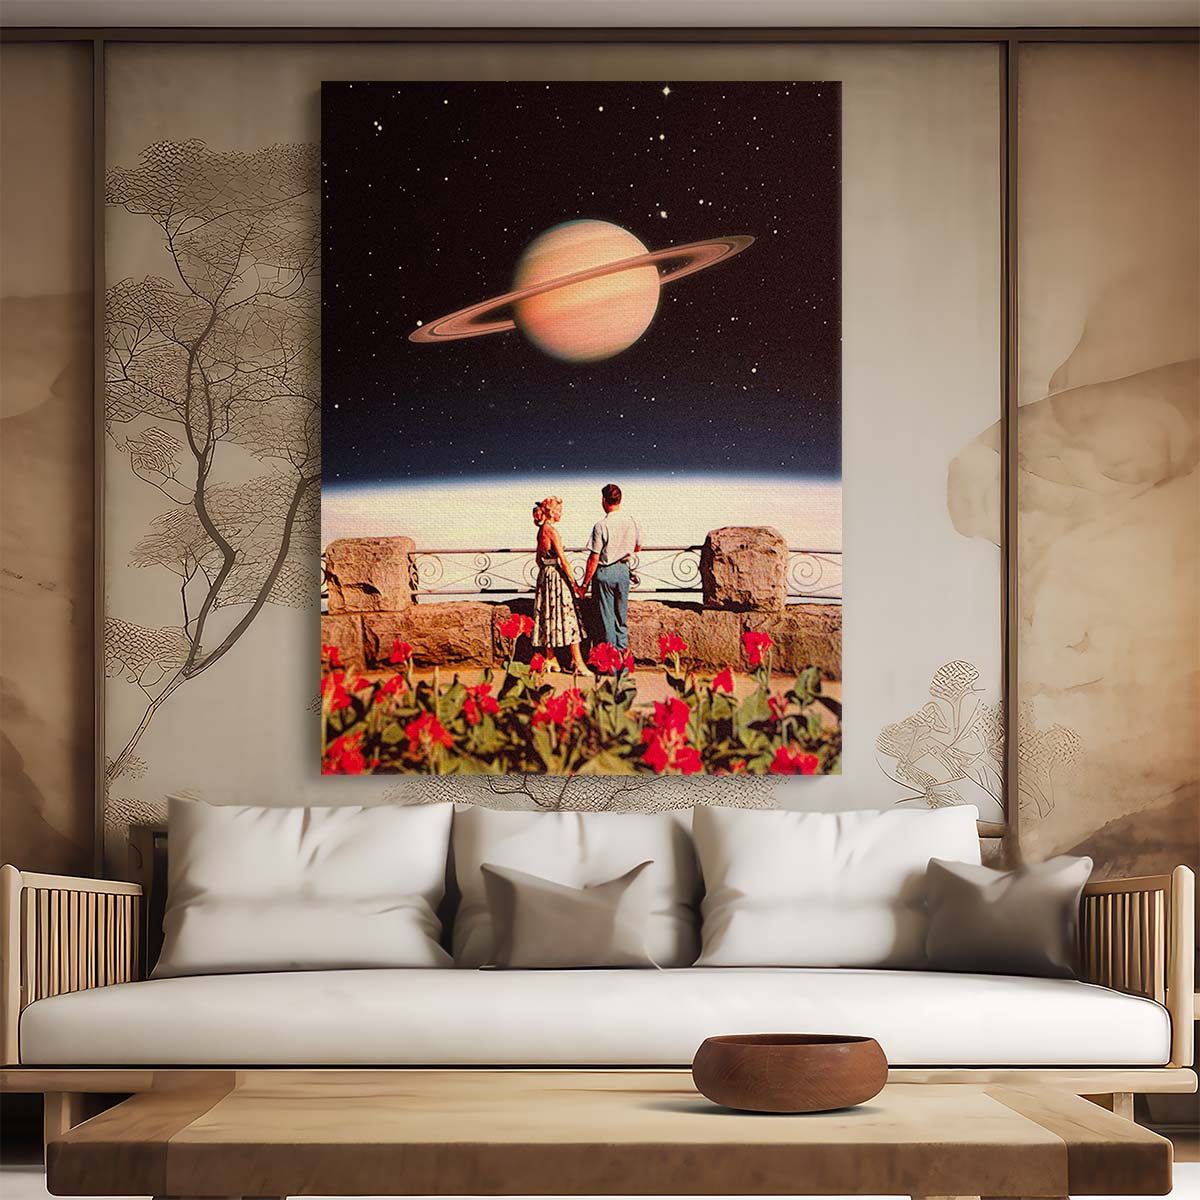 Romantic Space Adventure Digital Collage Art by Taudalpoi by Luxuriance Designs, made in USA